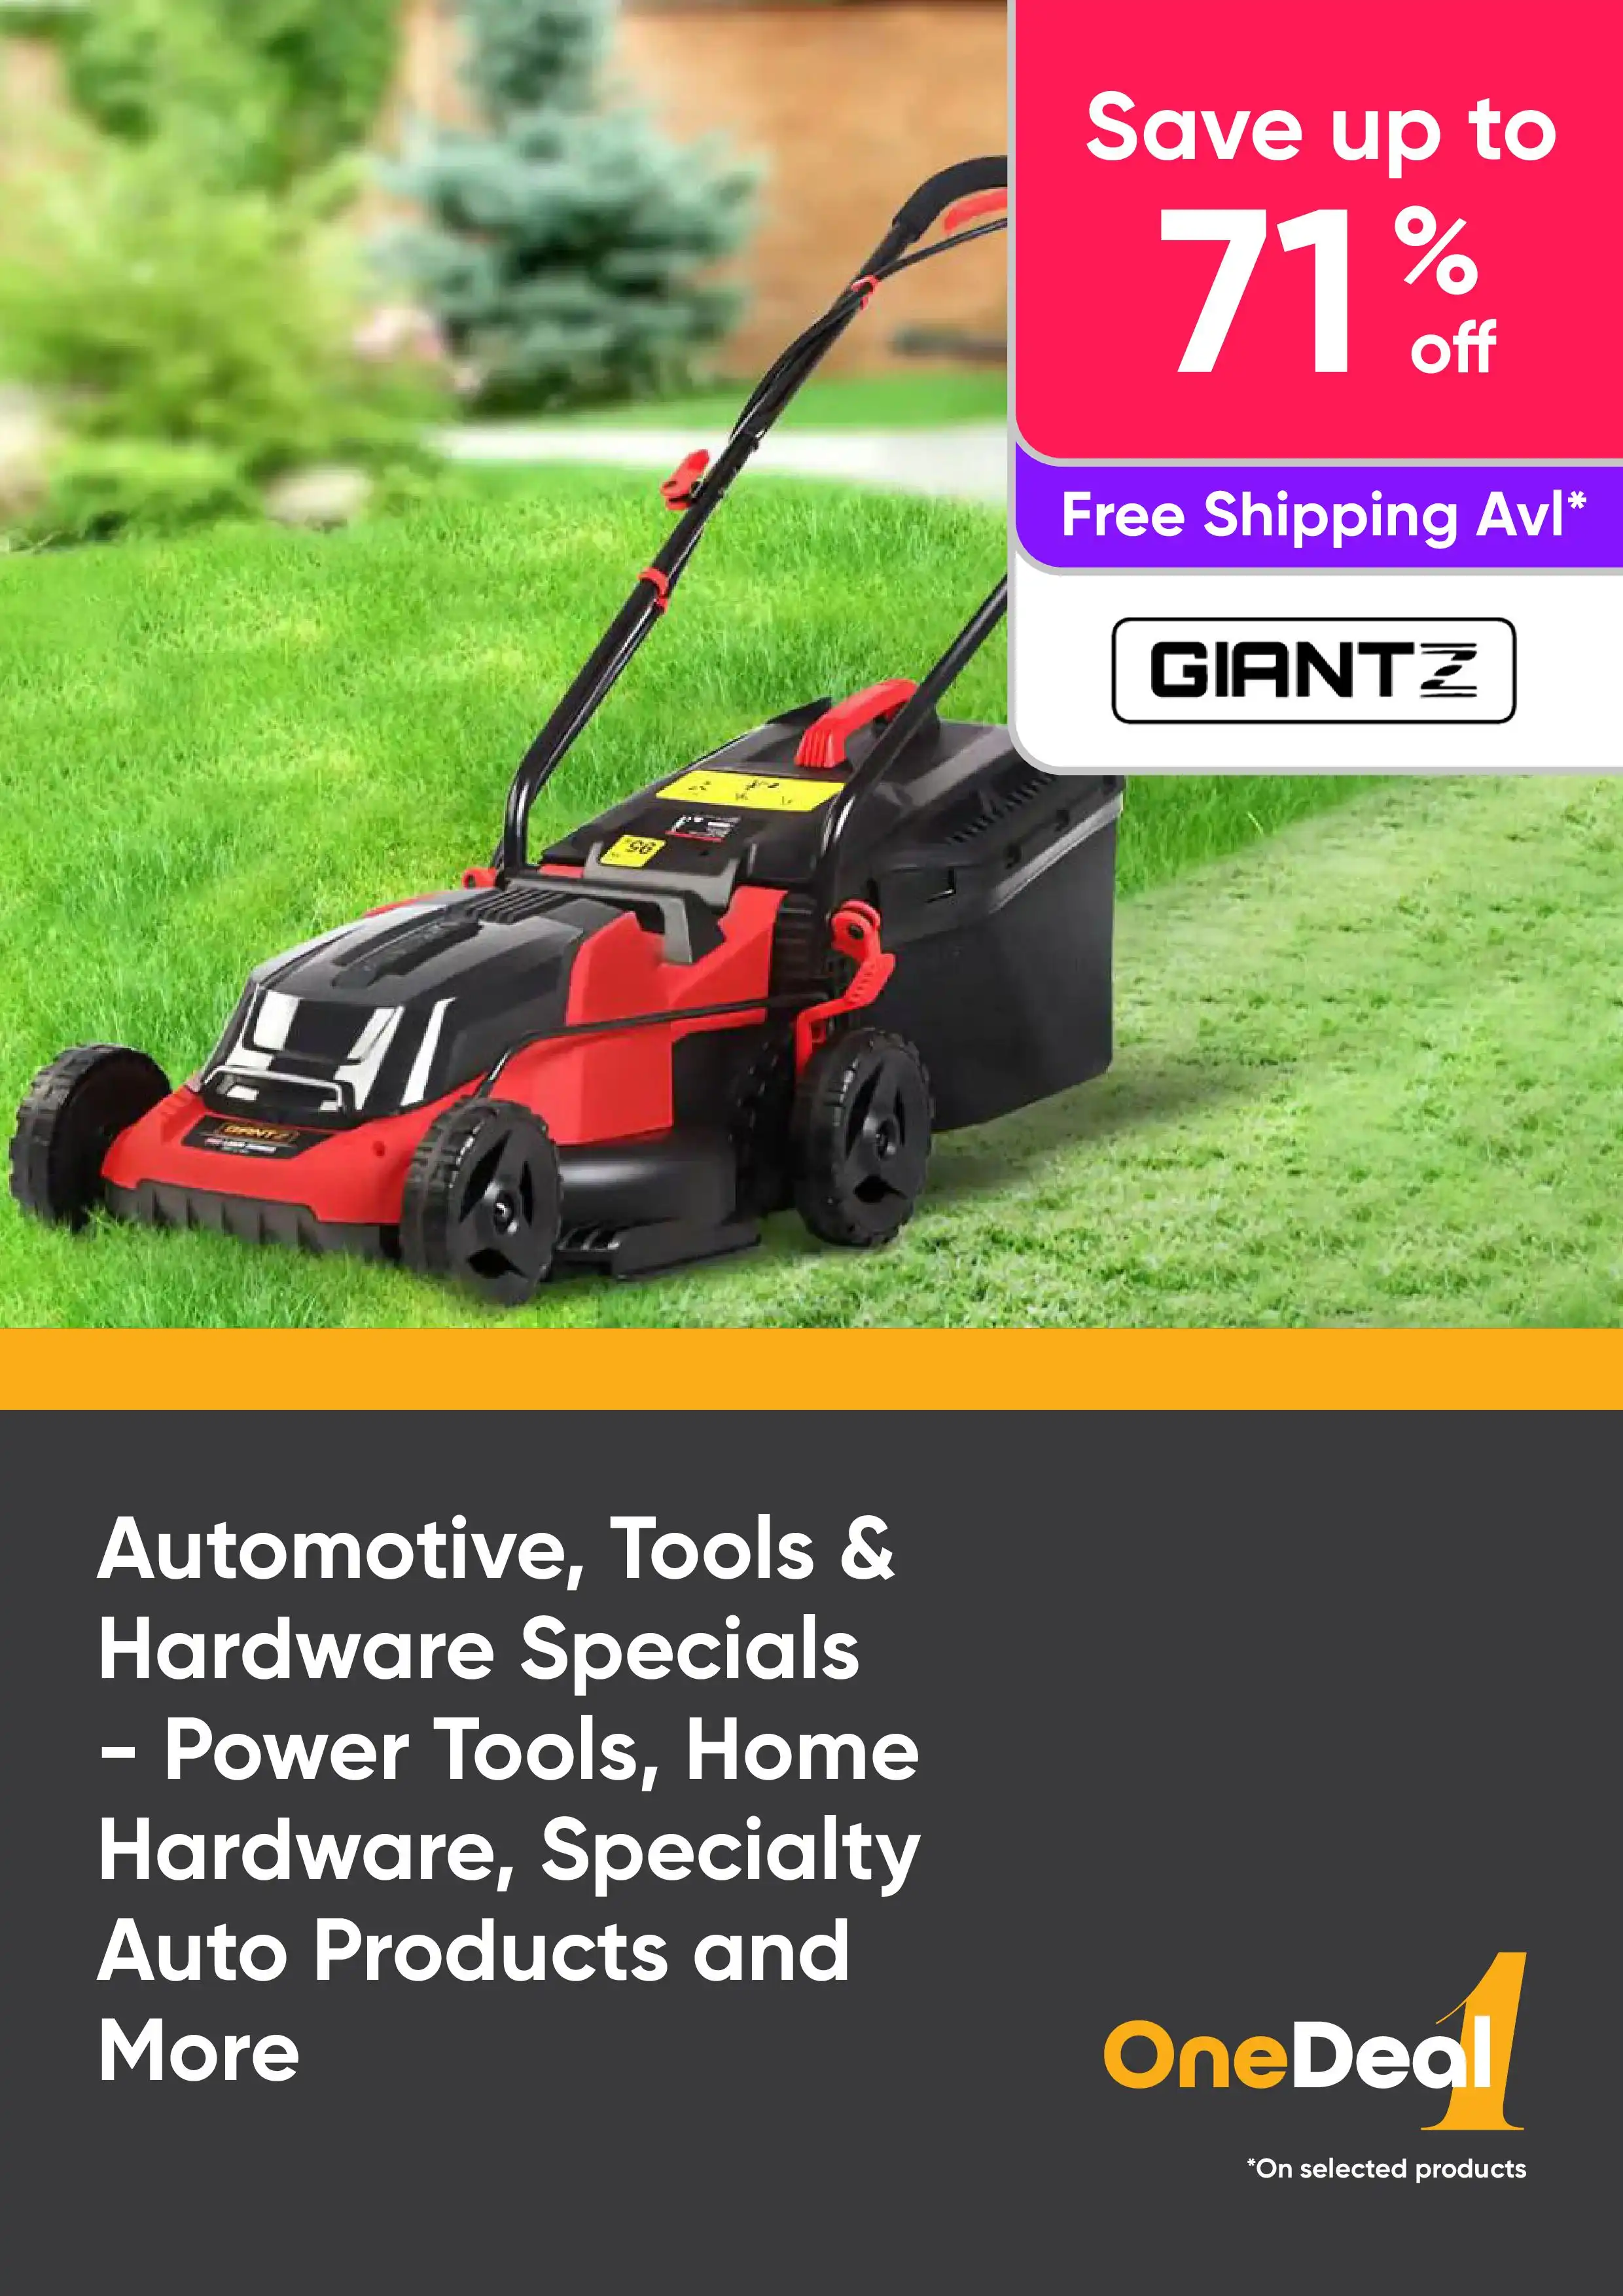 Automotive, Tools & Hardware Specials - Power Tools, Home Hardware, Specialty Auto Products and More - Save up to 71% Off